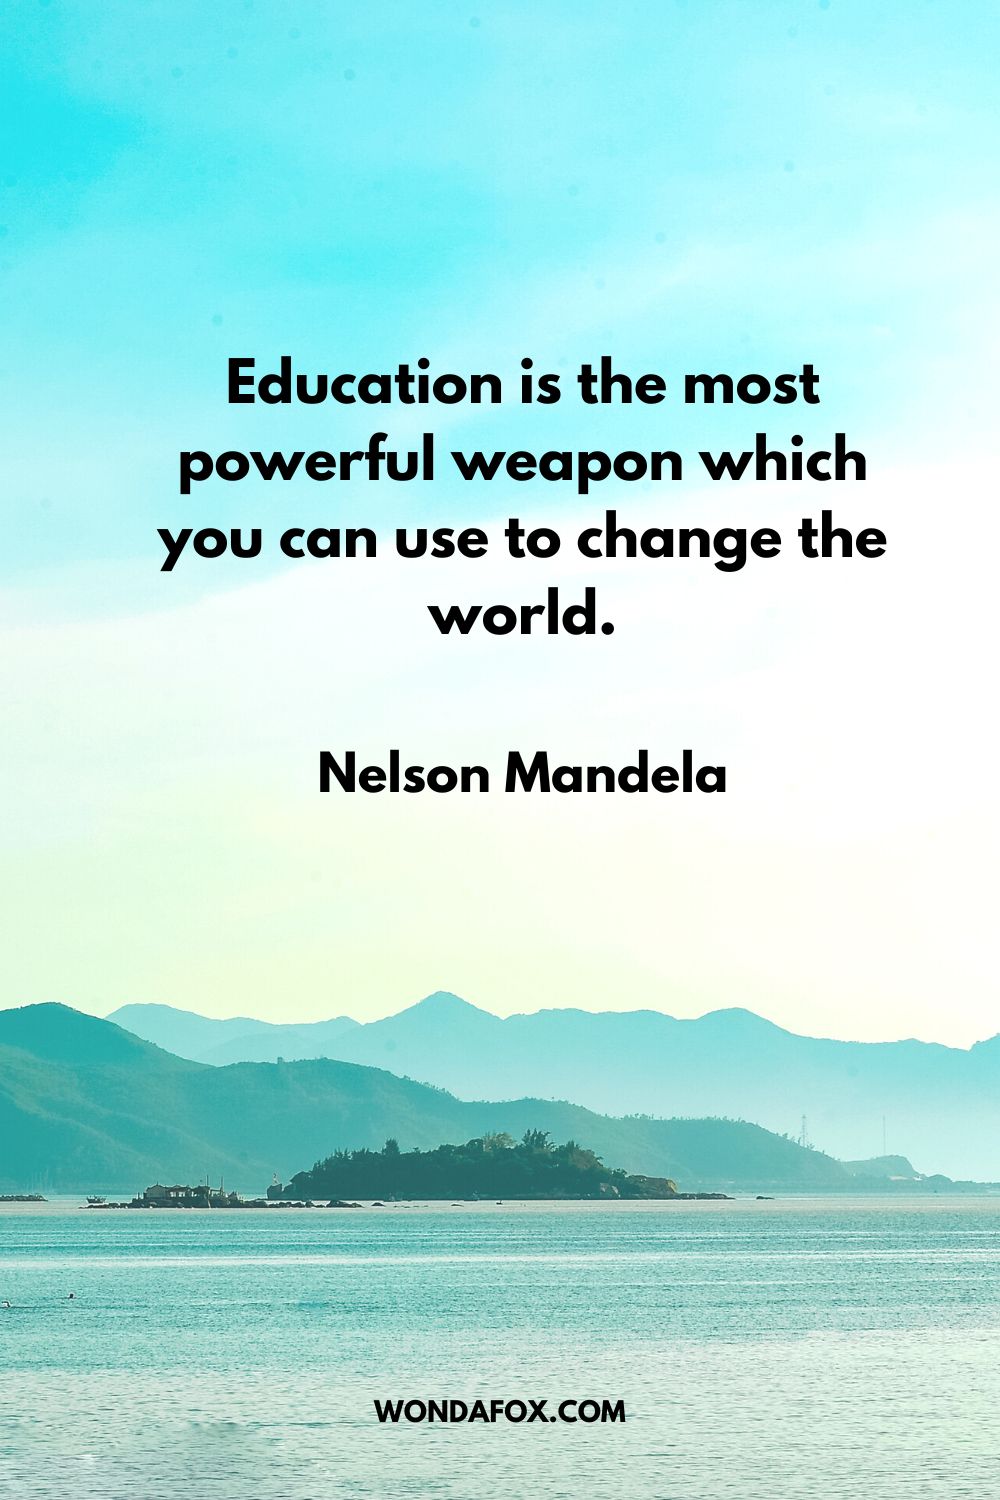 Education is the most powerful weapon which you can use to change the world. Nelson Mandela